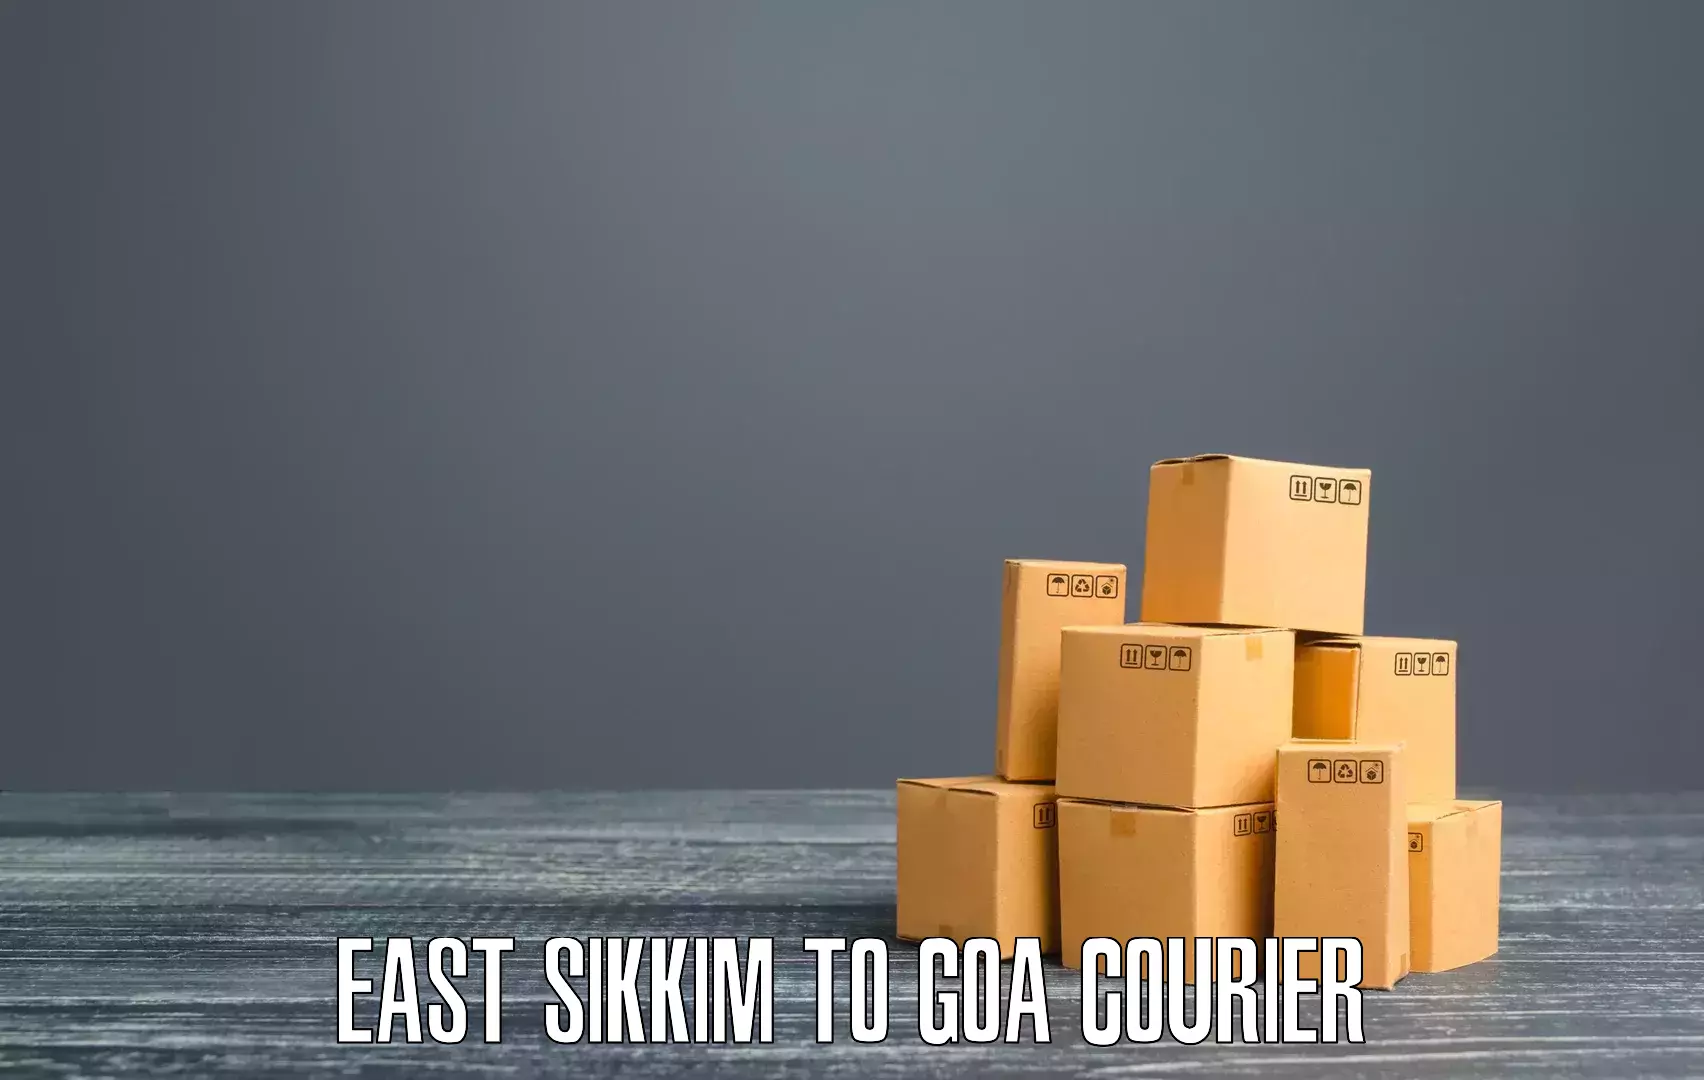 Advanced courier platforms East Sikkim to South Goa